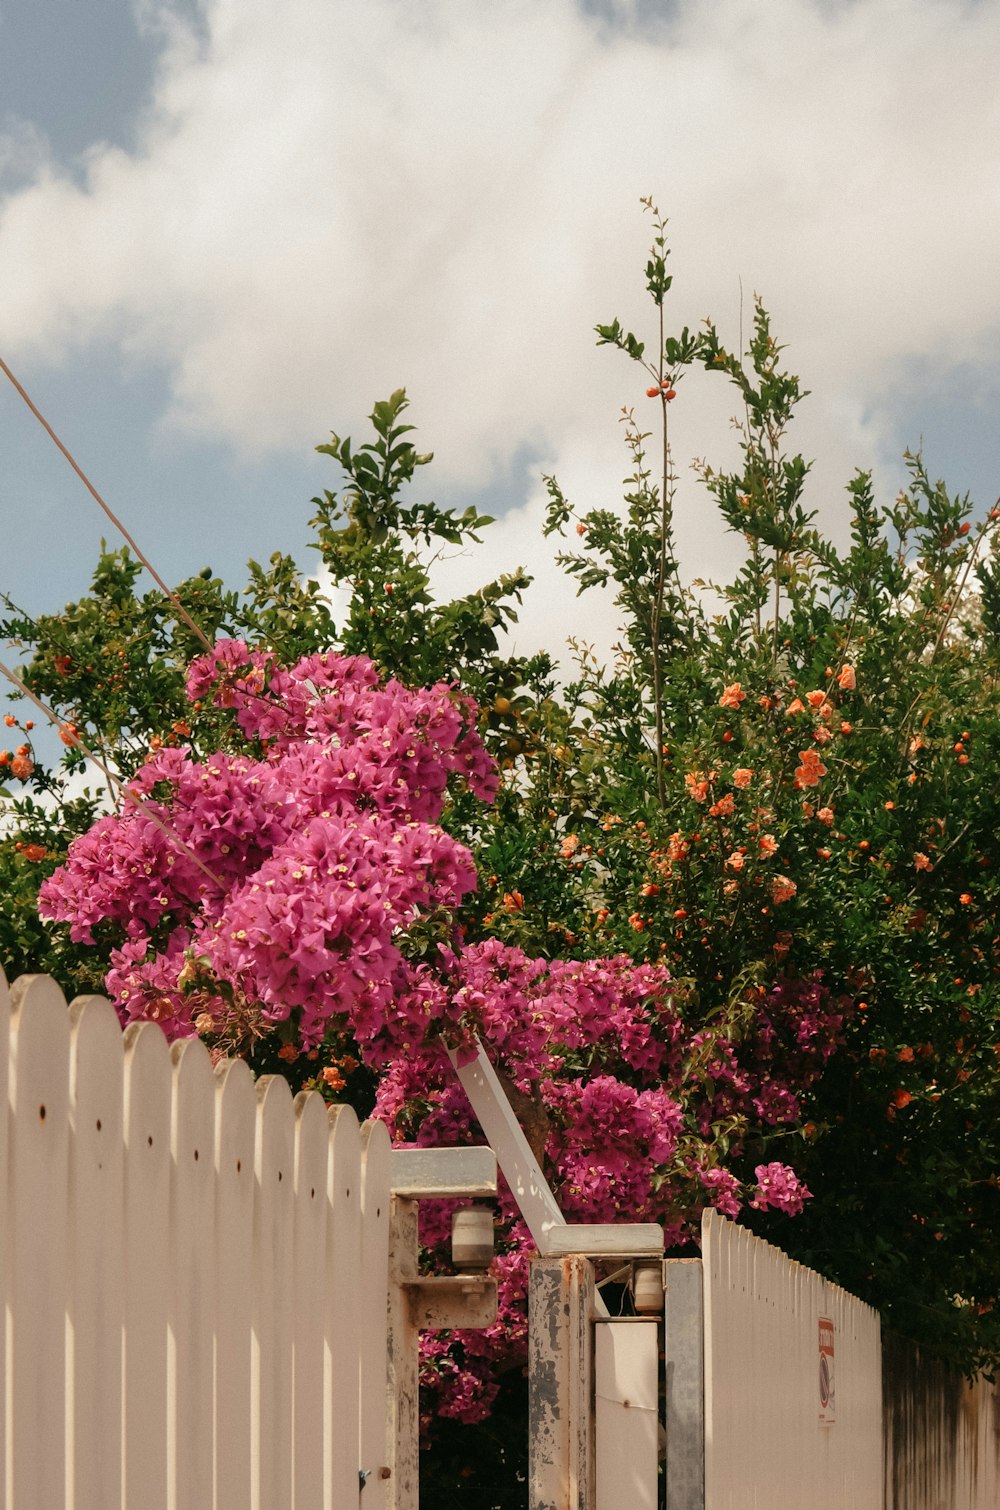 a white picket fence with pink flowers on it